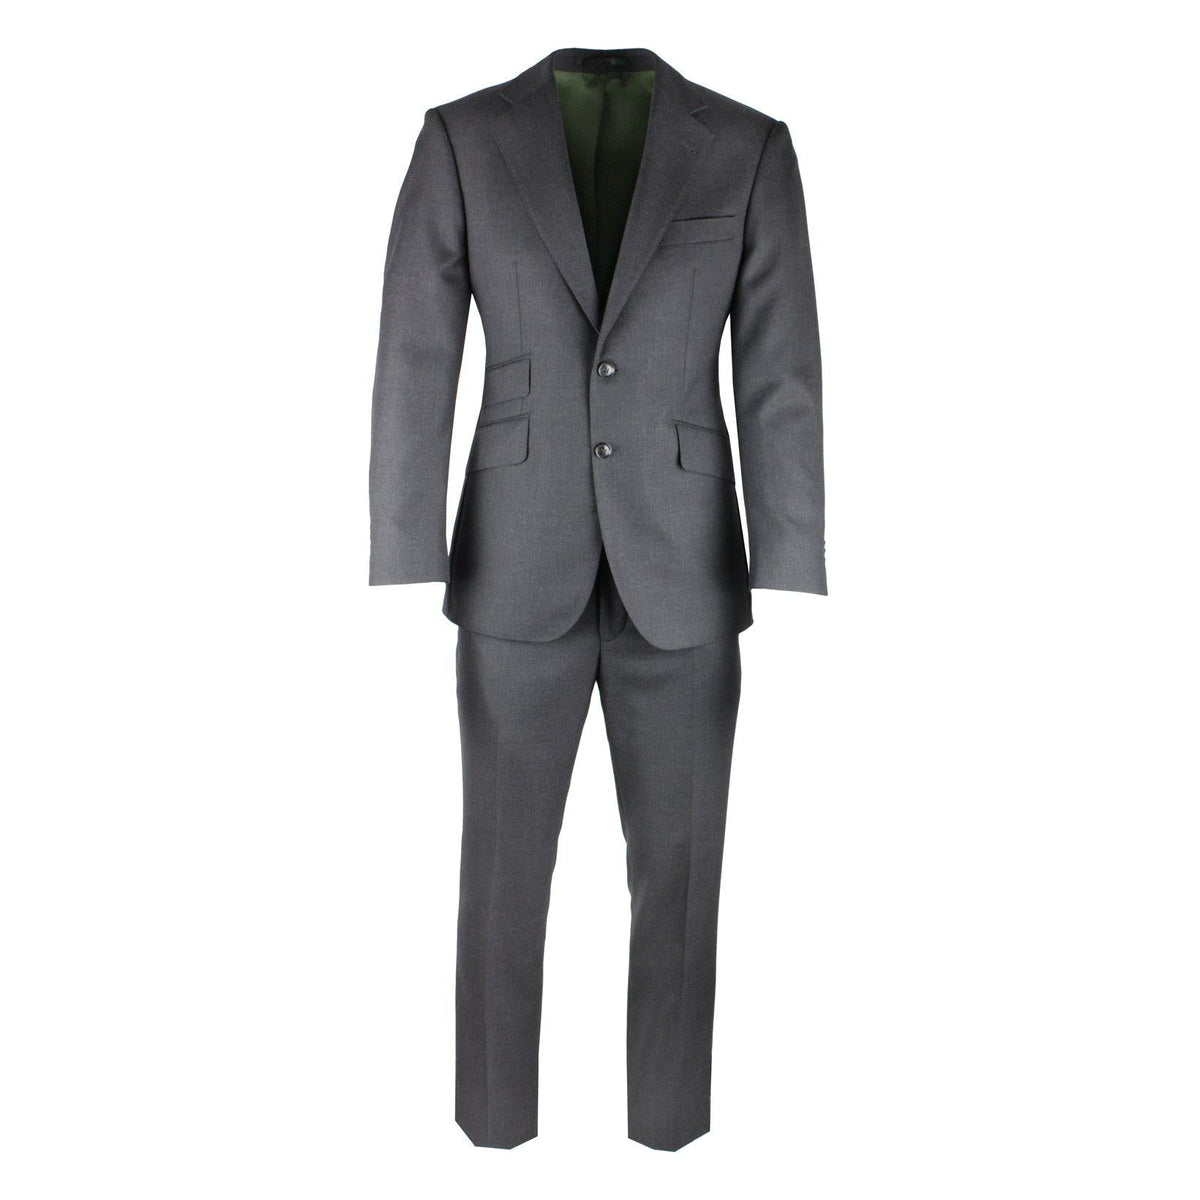 New wool suit - Conrad Hasselbach Shoes & Garment